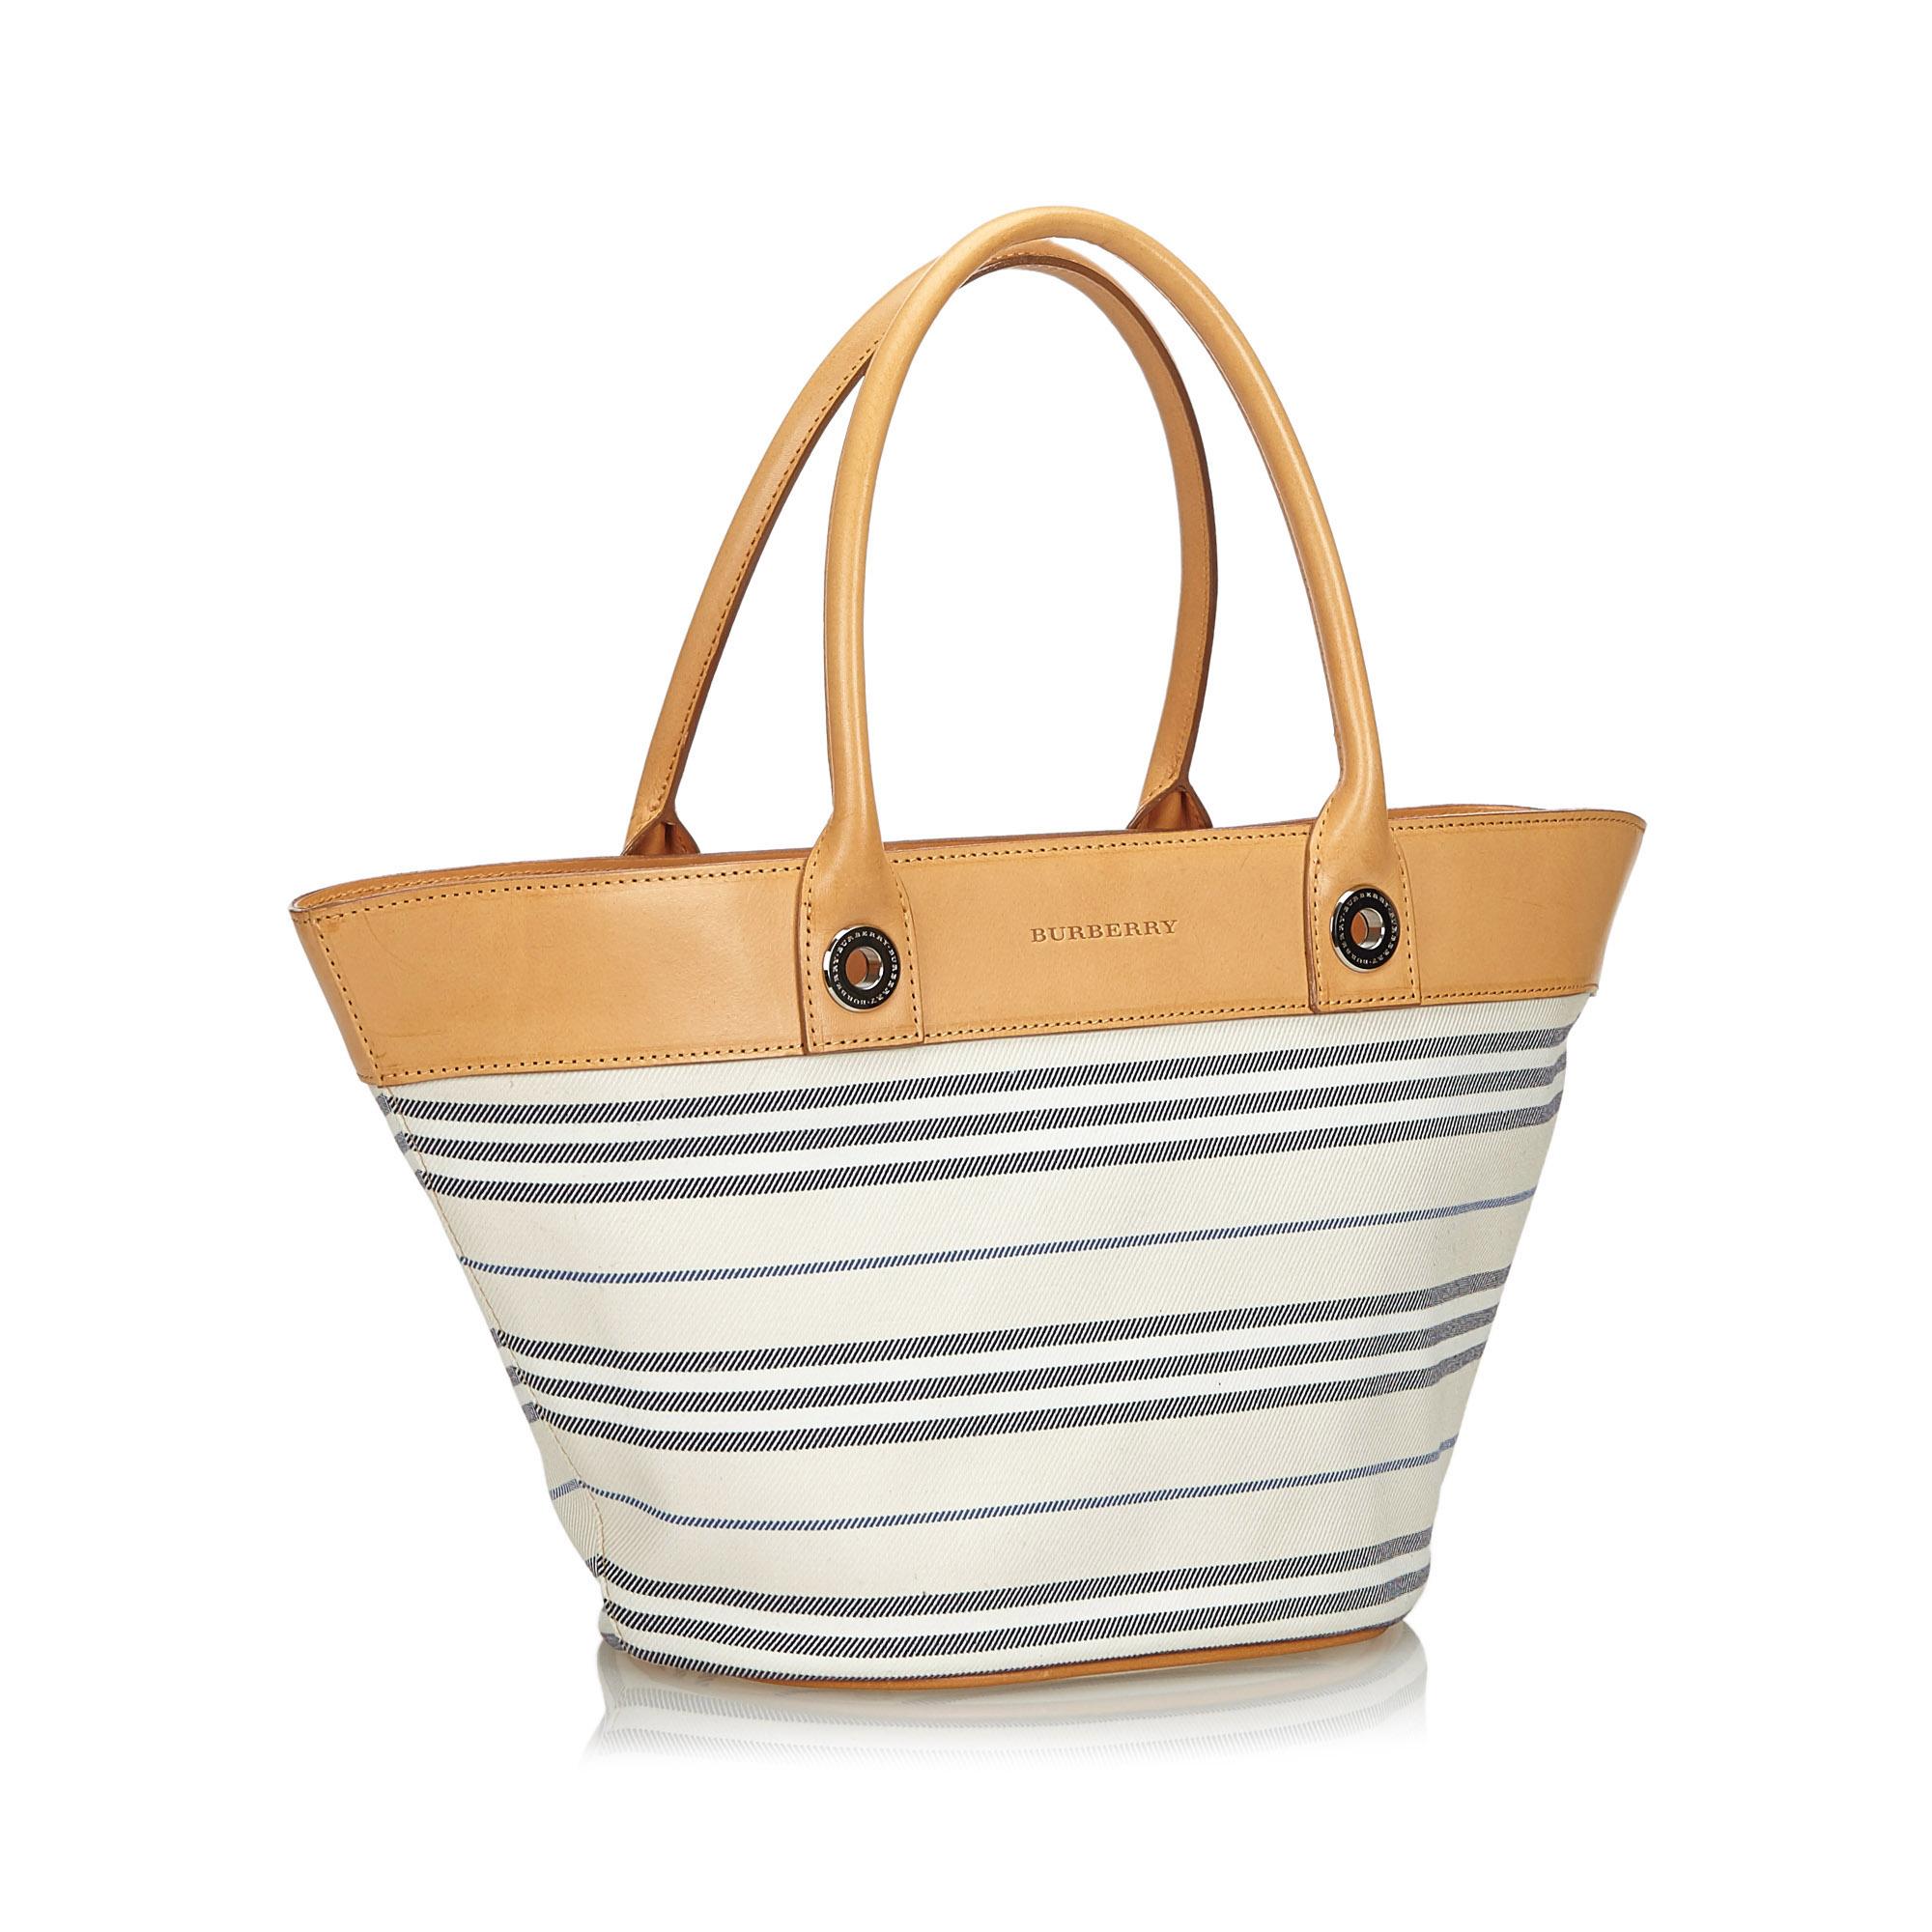 This shoulder bag features a striped canvas body with leather trim, rolled leather handles, an open top, and interior zip and slip pockets. It carries as AB condition rating.

Inclusions: 
This item does not come with